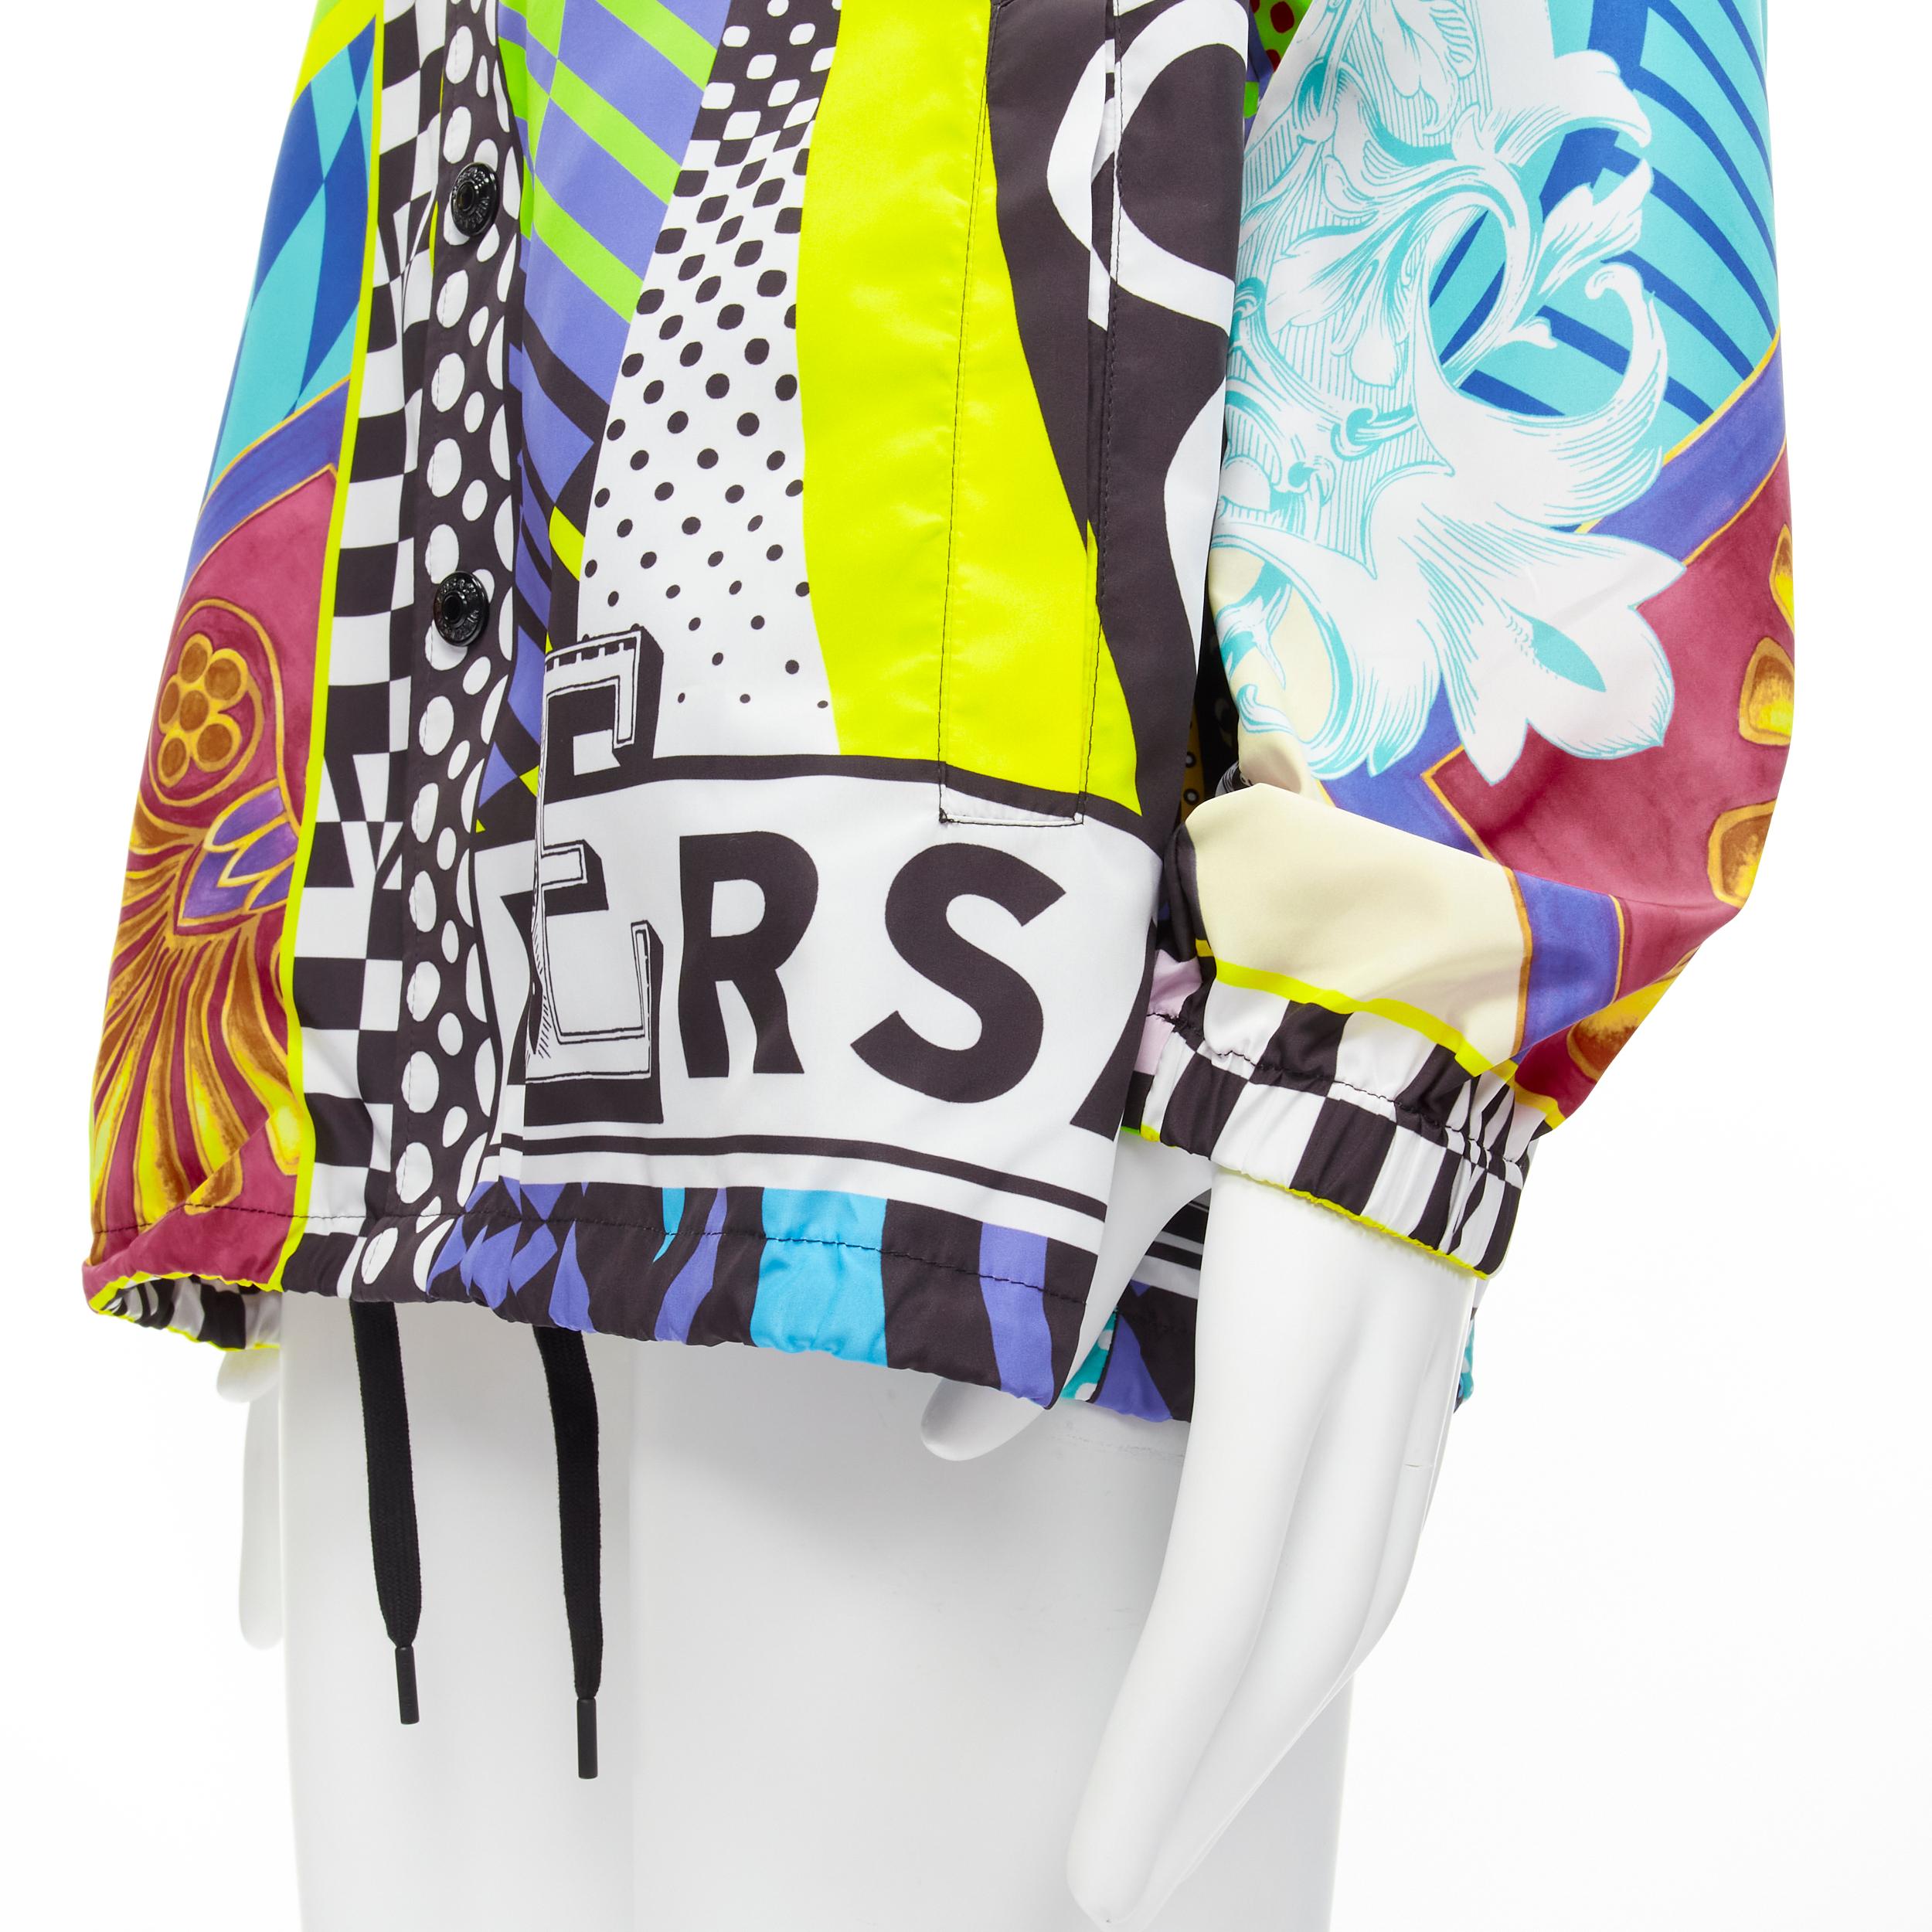 new VERSACE 2020 Runway Pop Temple nylon windbreaker over shirt jacket IT46 S
Reference: TGAS/C00121
Brand: Versace
Designer: Donatella Versace
Collection: Pop Temple Runway
Material: Nylon
Color: Multicolor
Pattern: Abstract
Closure: Button
Extra